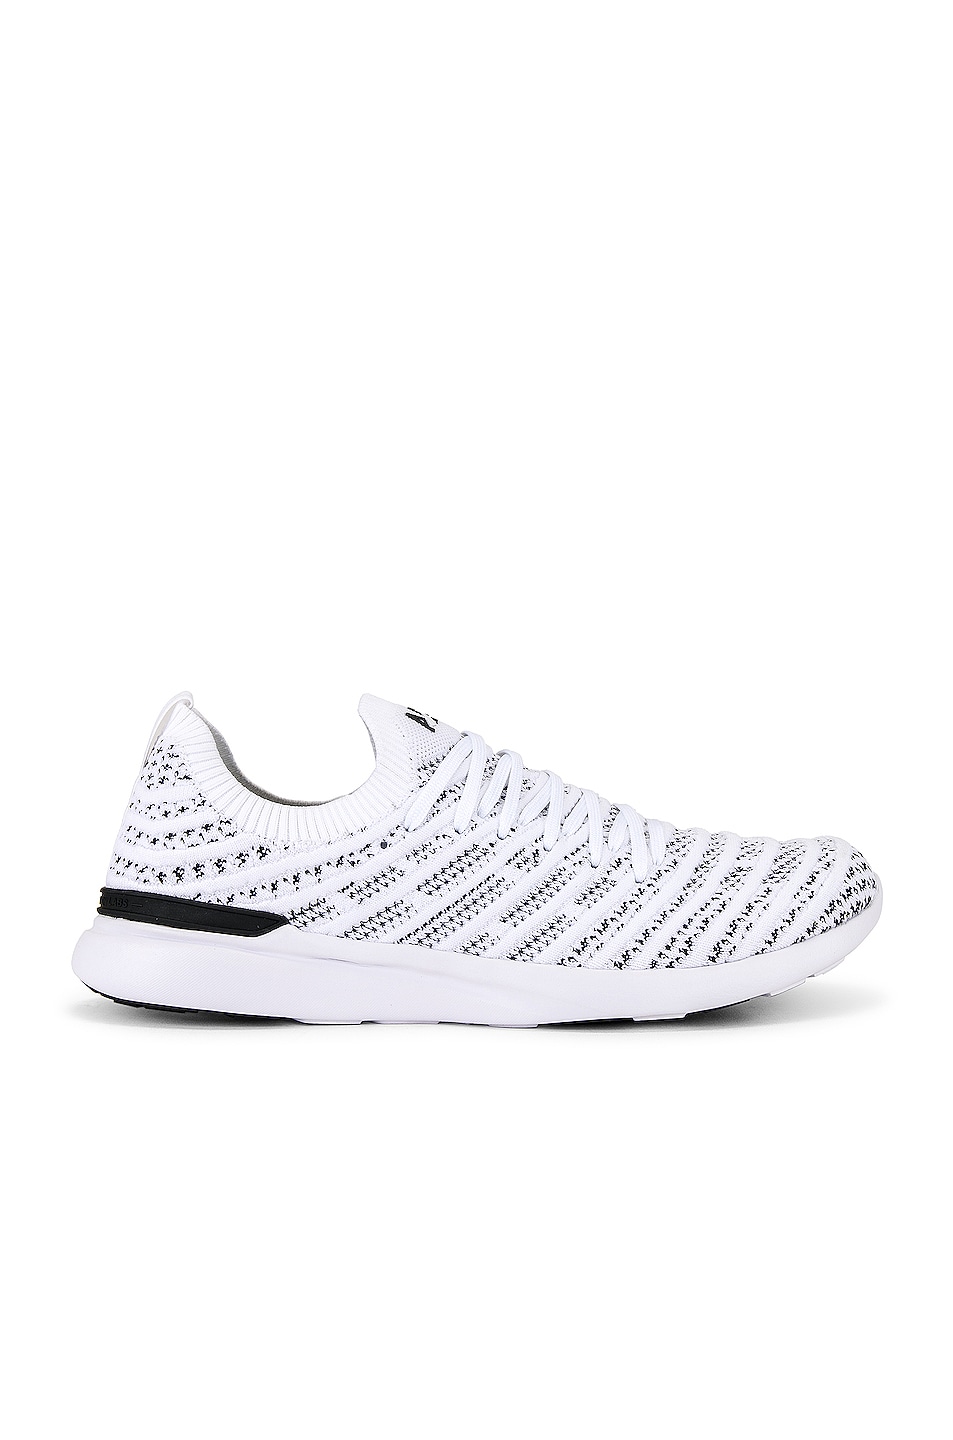 Image 1 of APL: Athletic Propulsion Labs Techloom Wave in White & Black